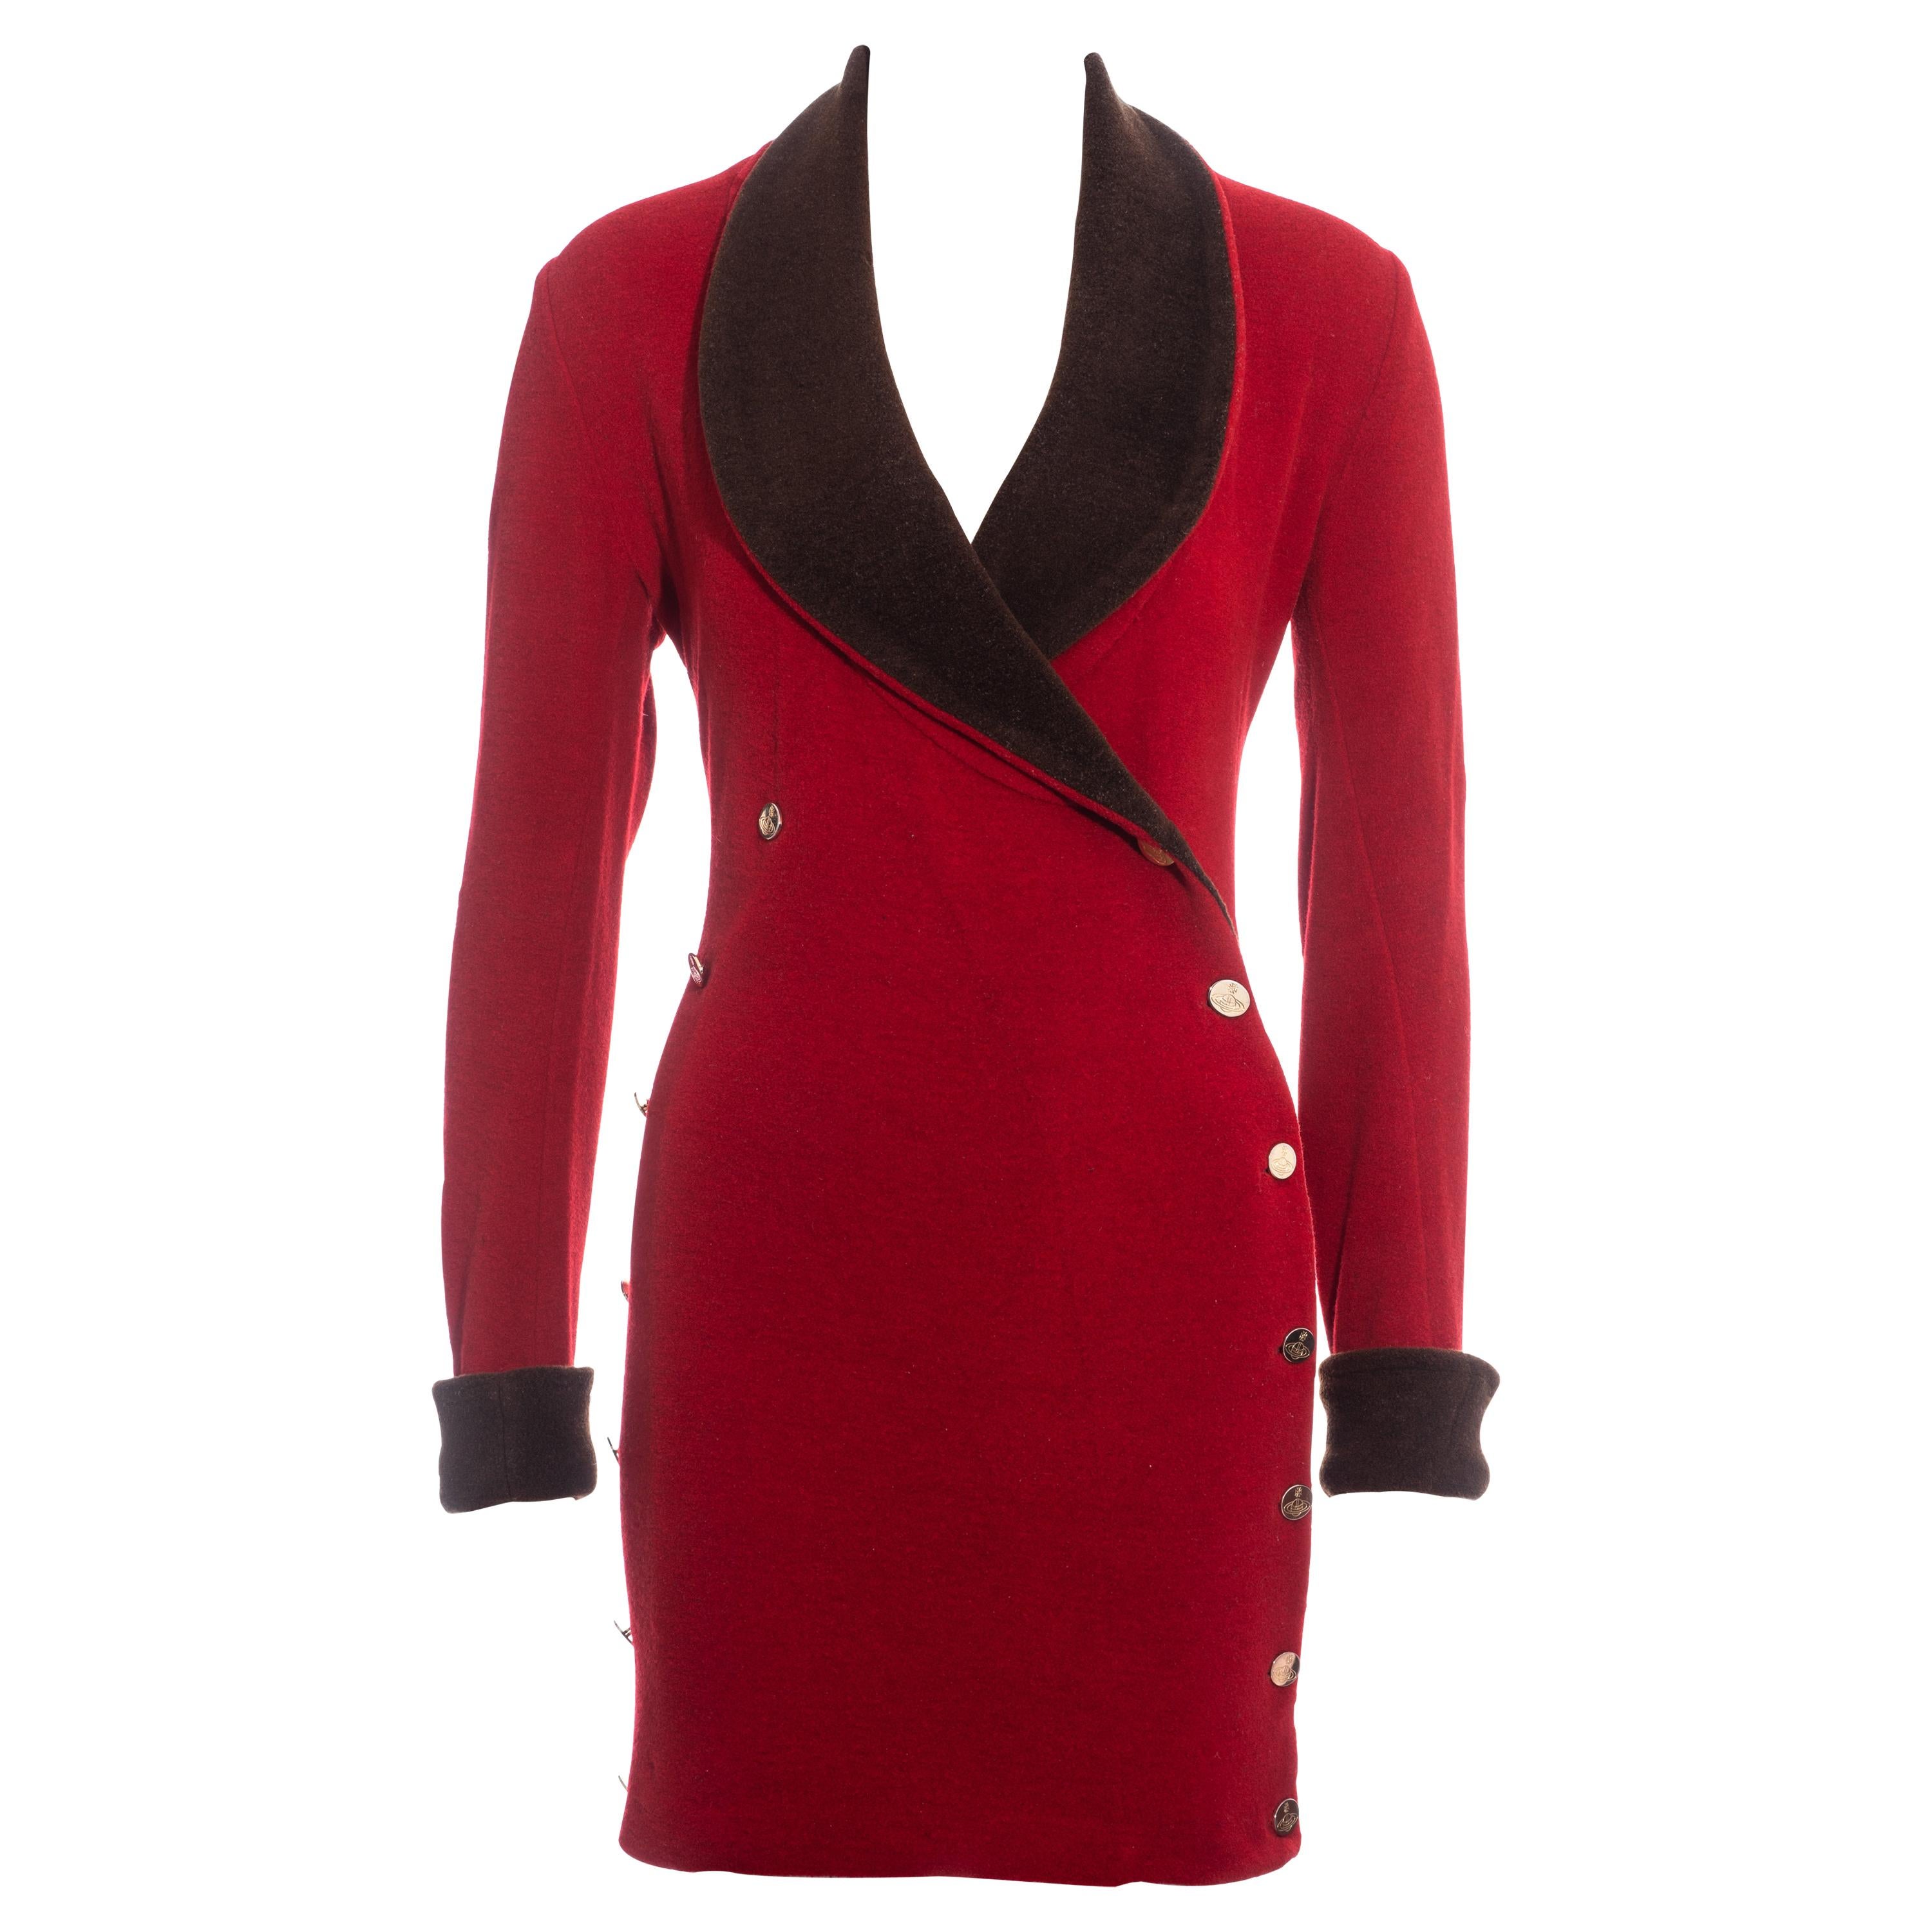 Vivienne Westwood red wool double-breasted blazer dress, fw 1989 